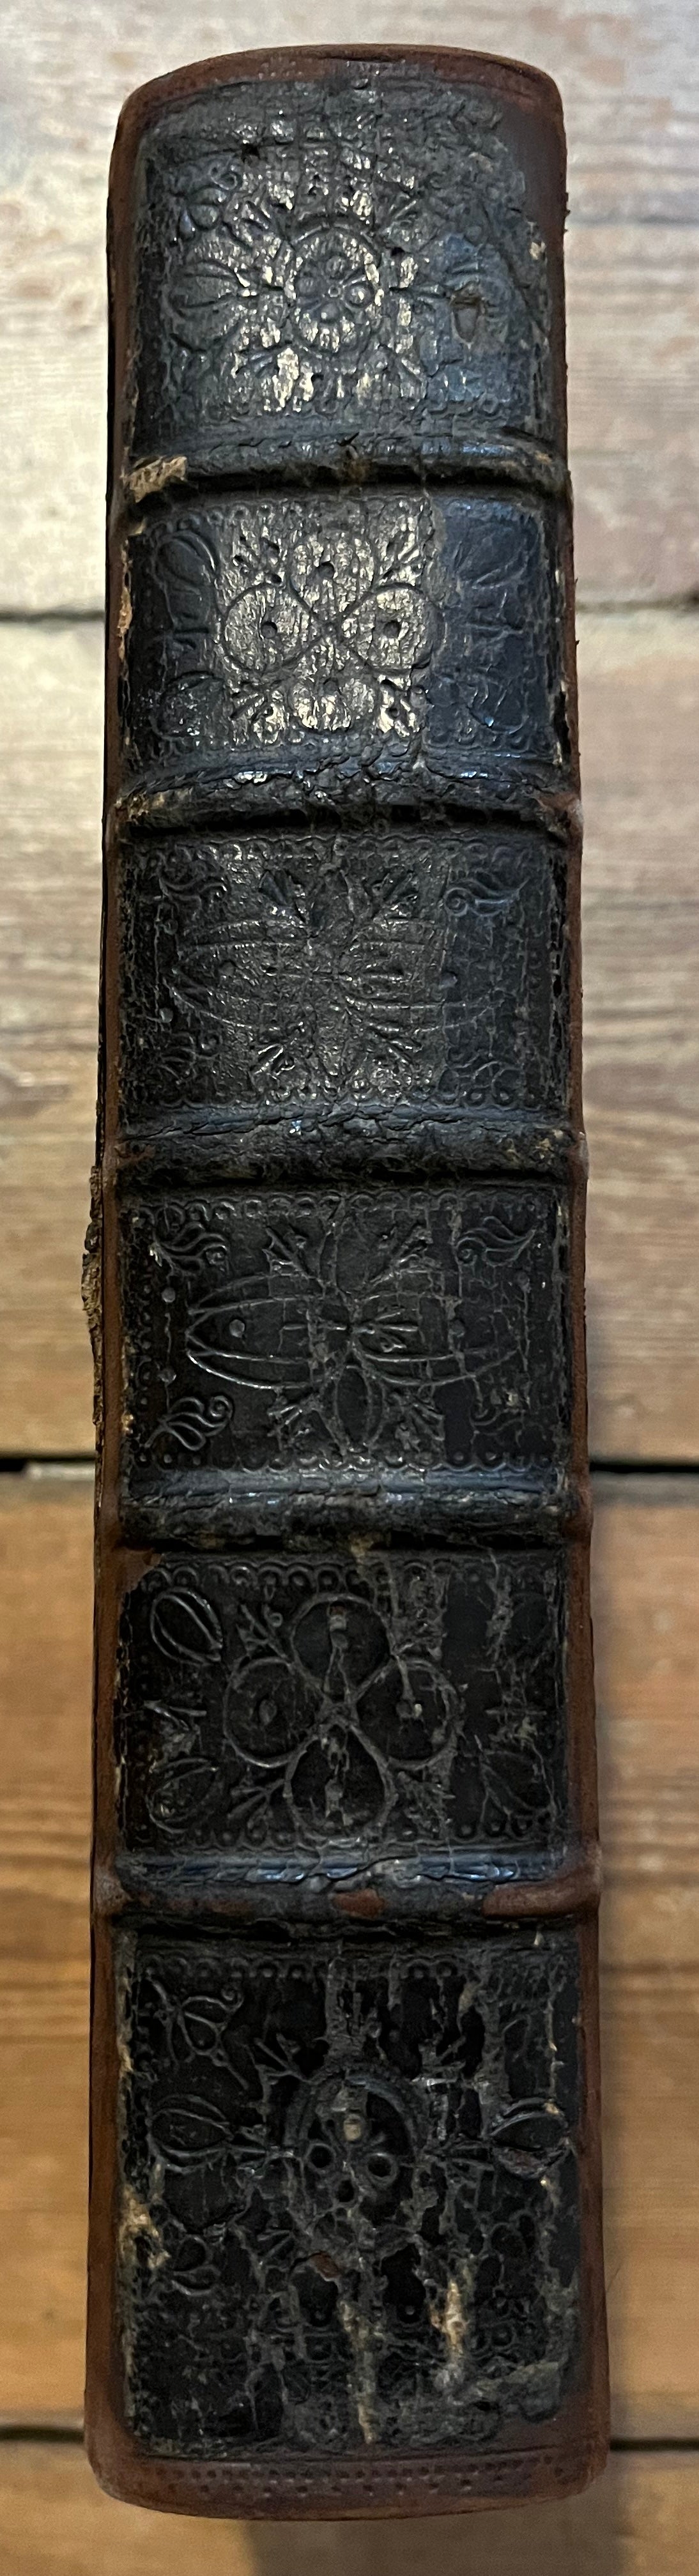 Field's Cambridge Edition of the King James Bible 1666 - Fine Contemporary binding with Extensive Ownership History